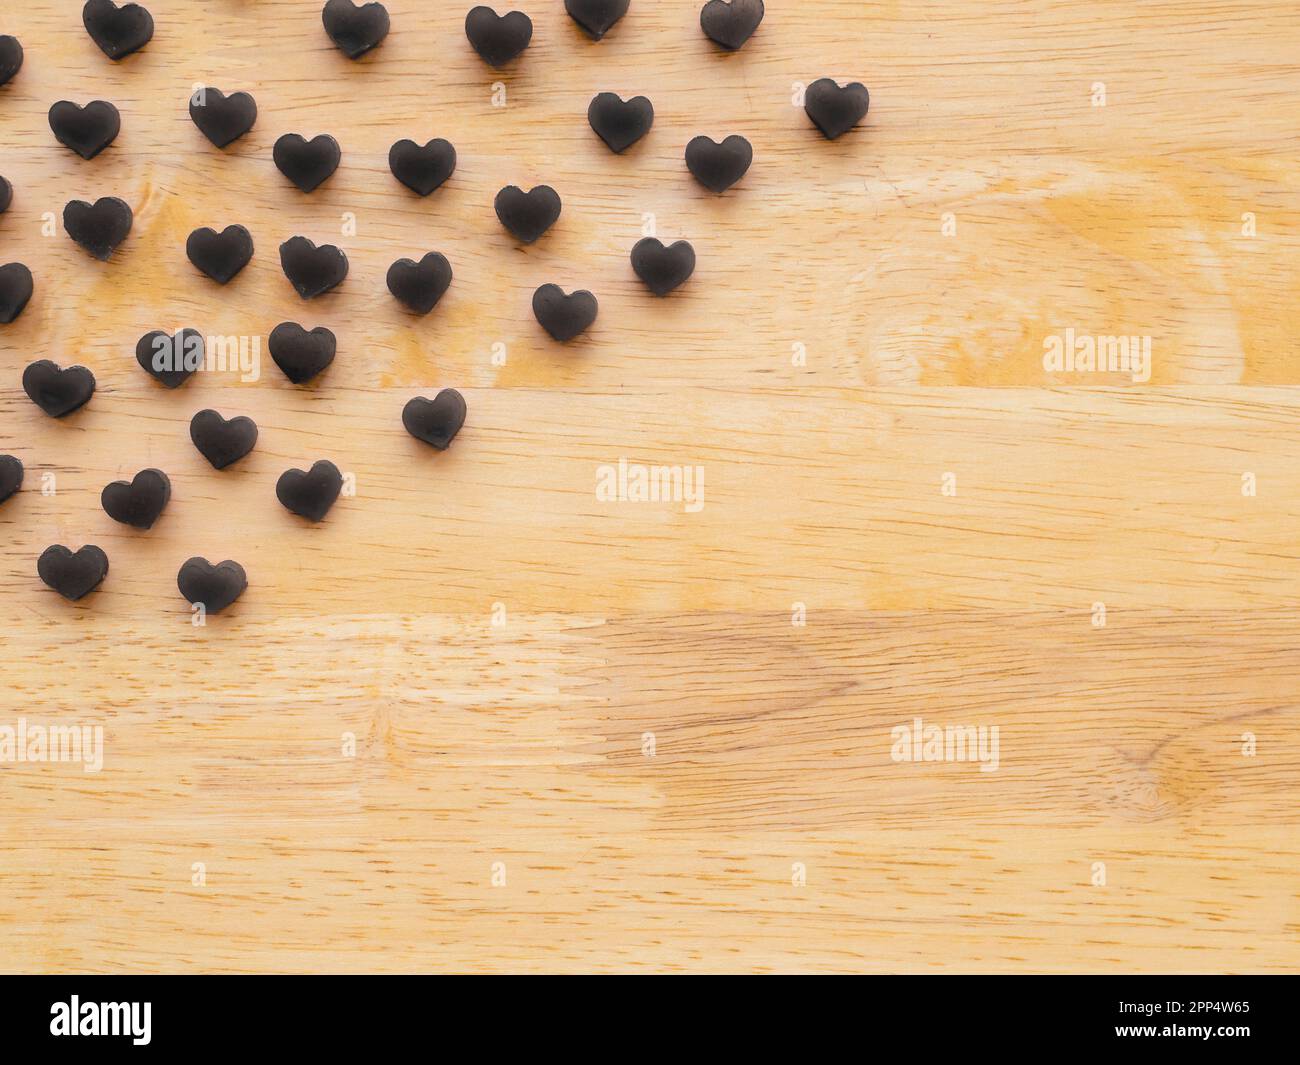 black heart shape made from candle on wooden table Stock Photo